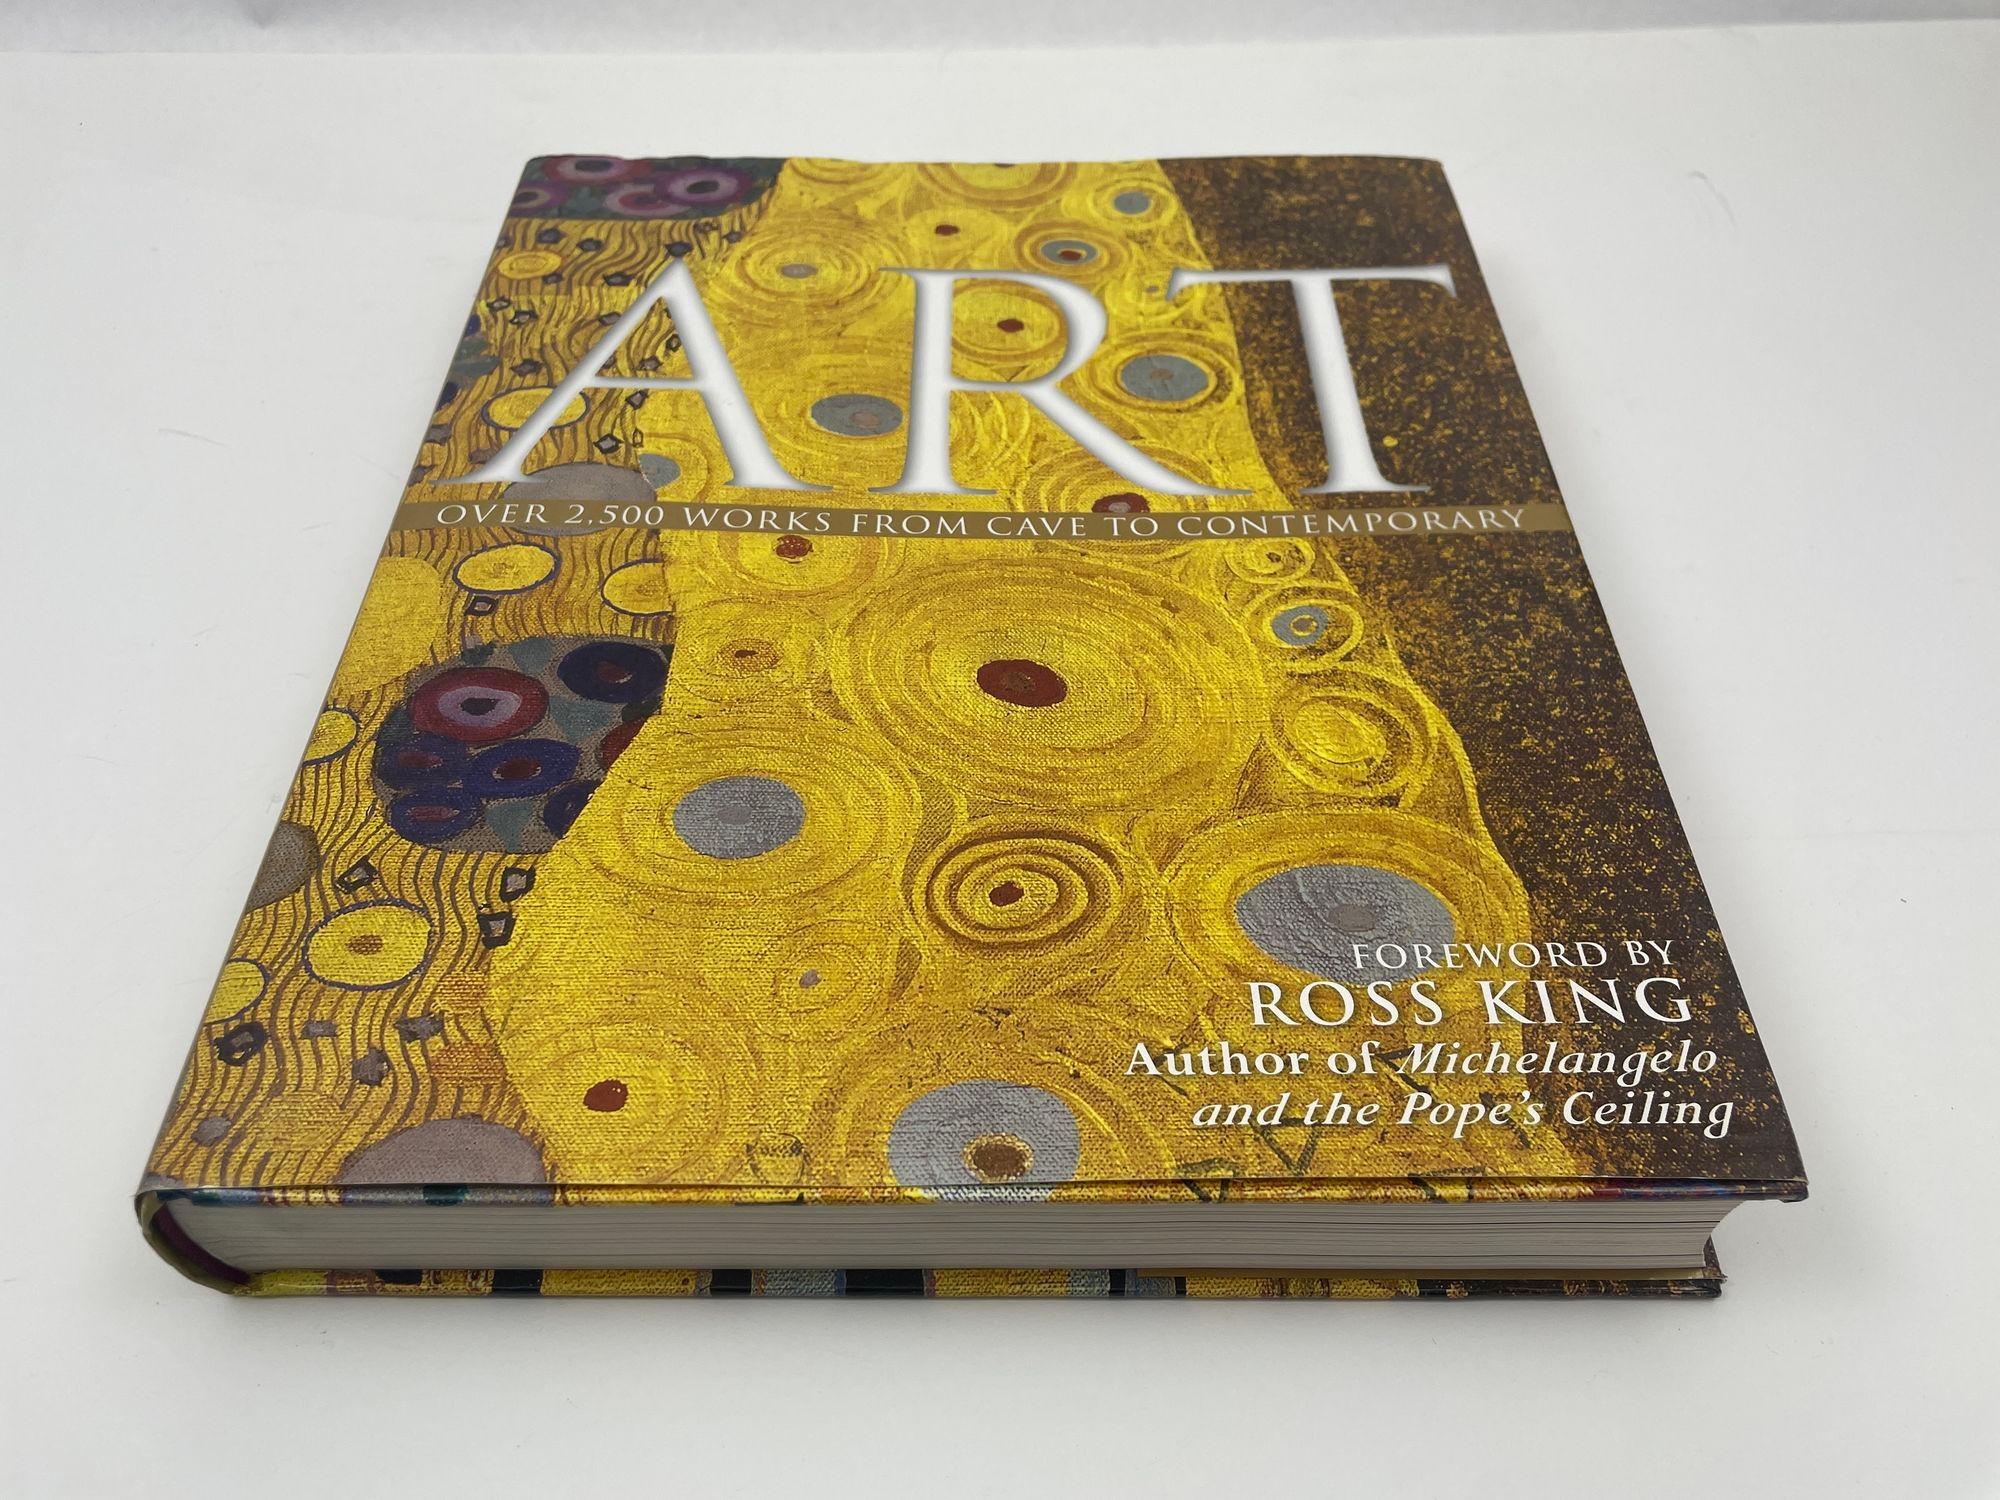 Modern Art Over 2500 Works from Cave to Contemporary by Nigel Ritchie Hardcover Book For Sale